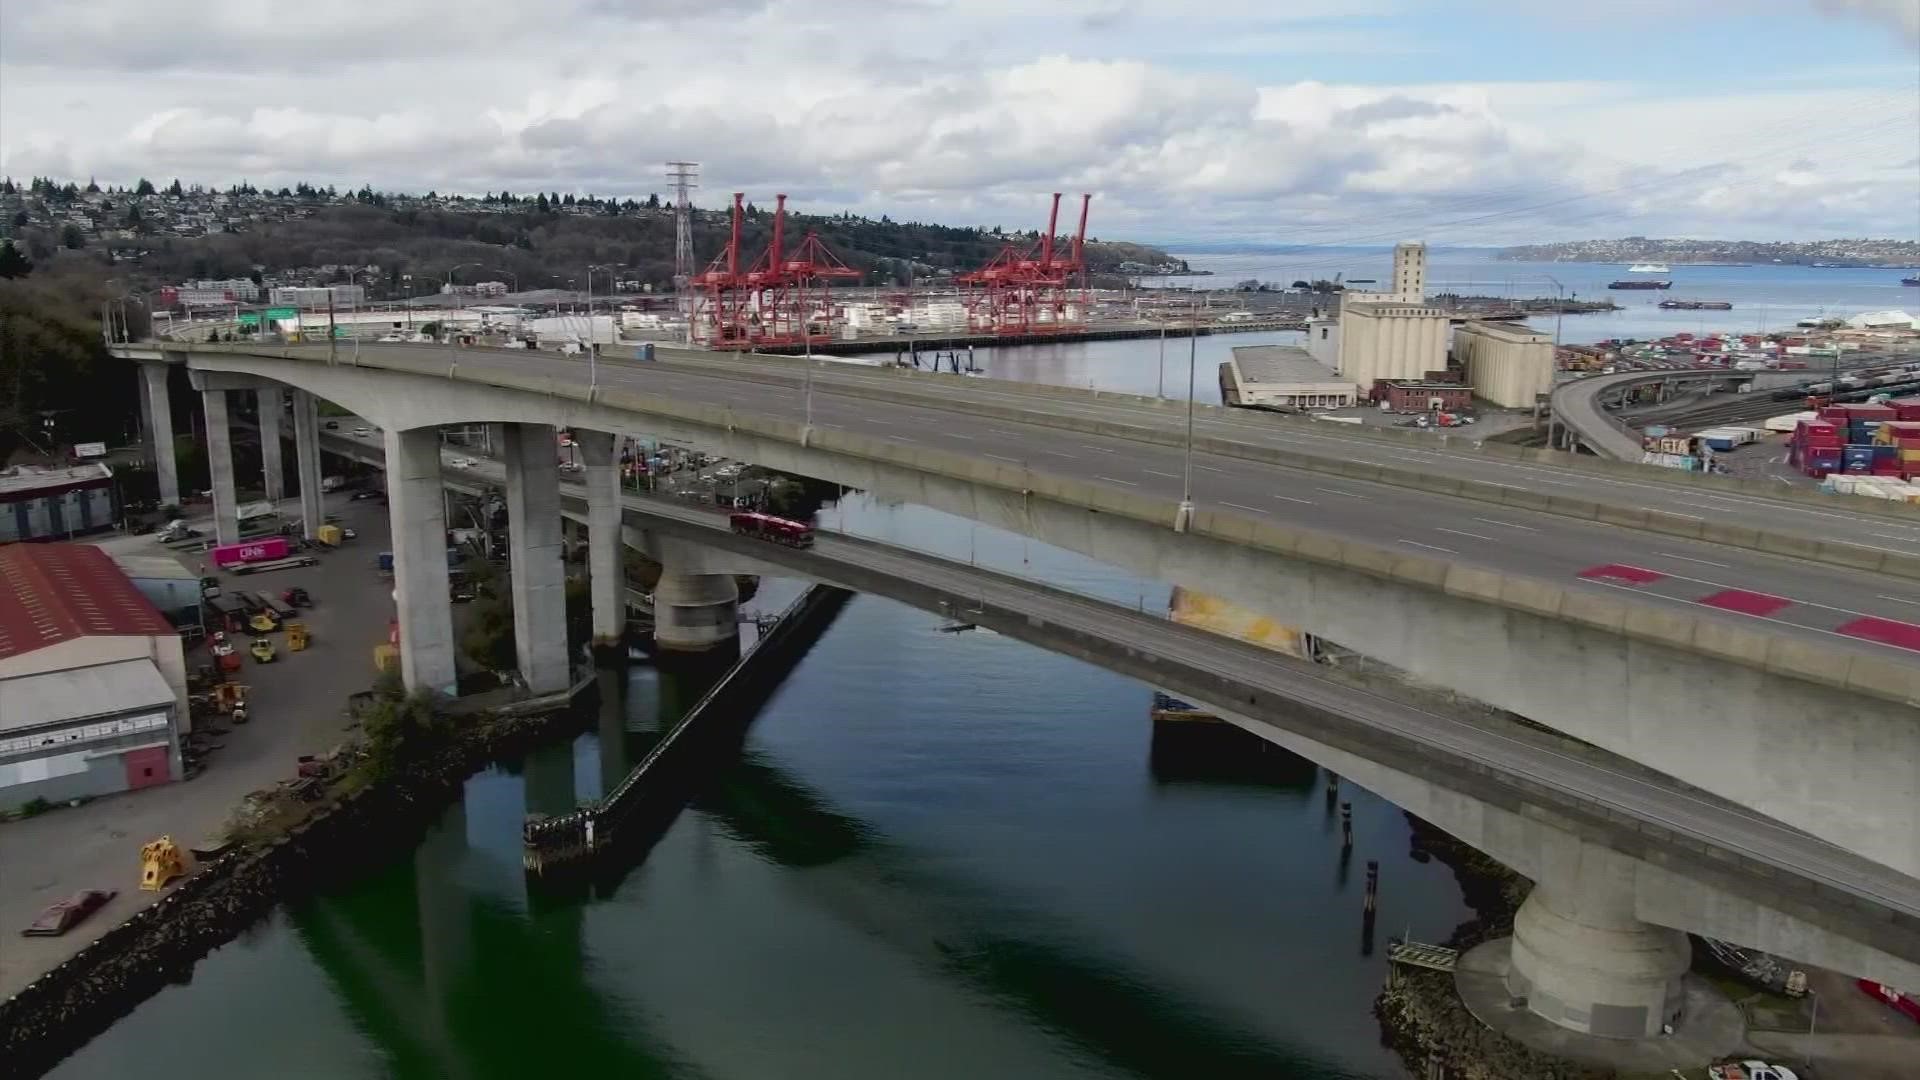 The West Seattle Bridge was closed in March 2020 and is expected to reopen in July 2022